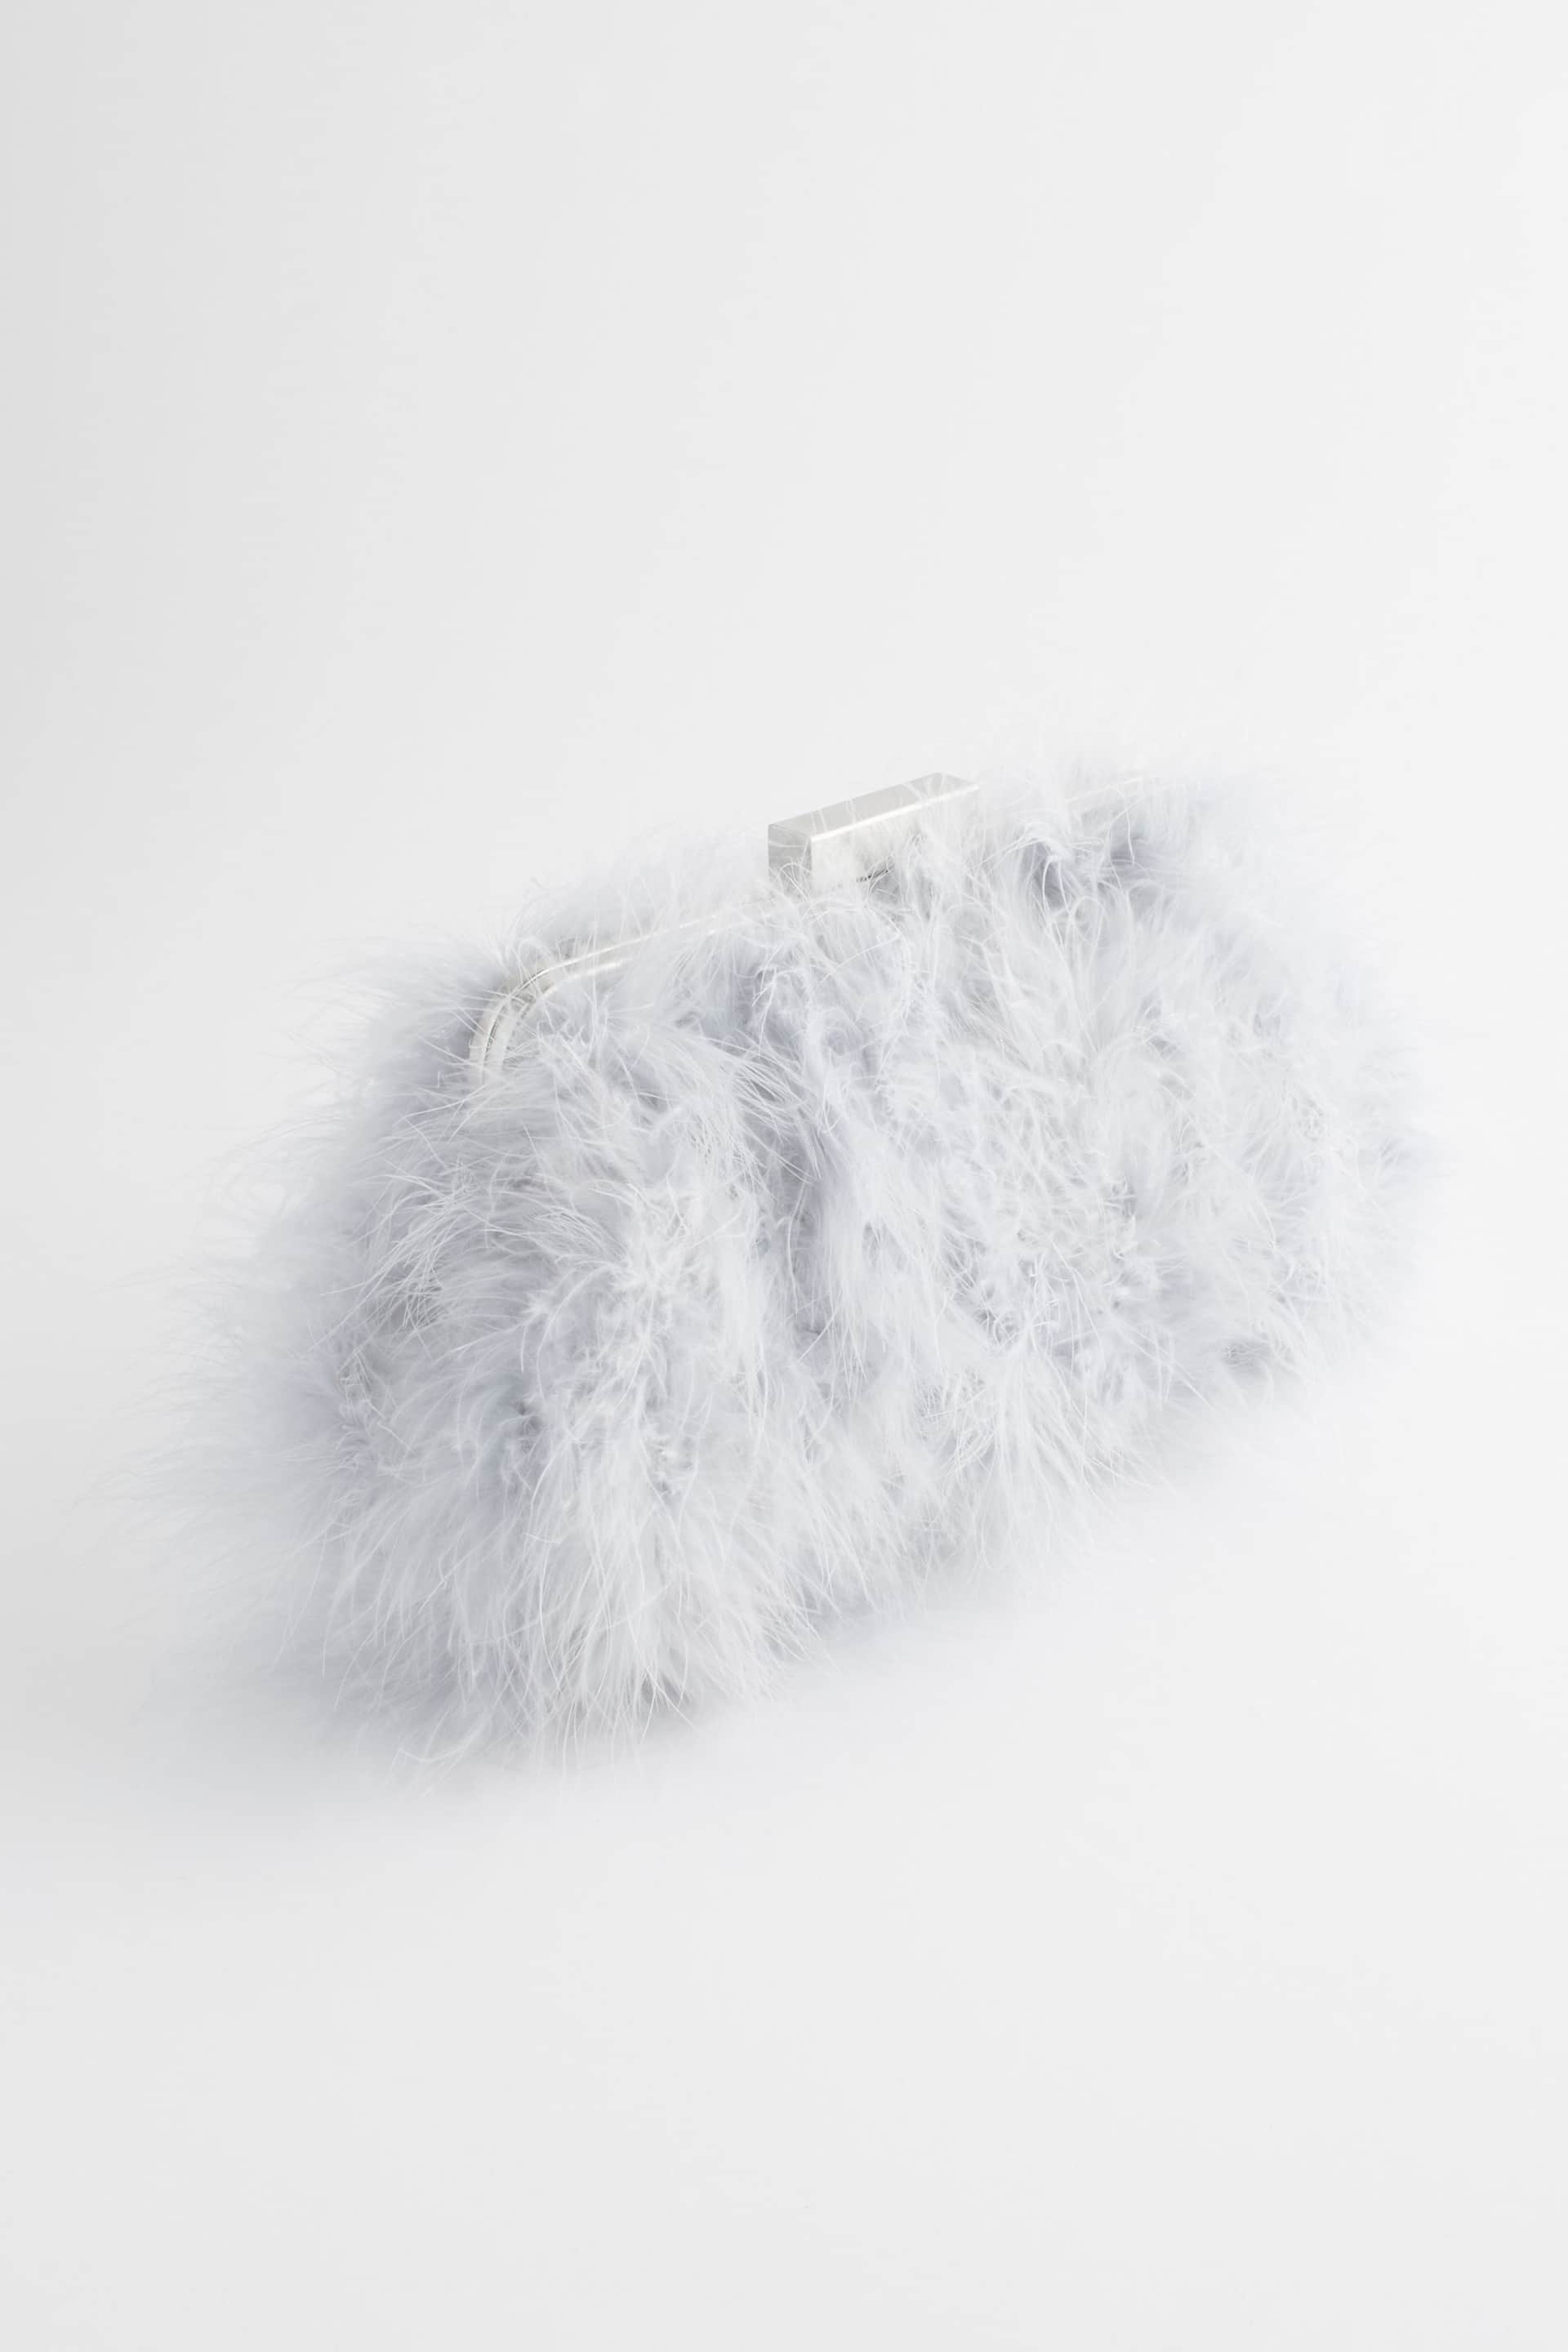 Grey Feather Clutch Bag - Image 5 of 9